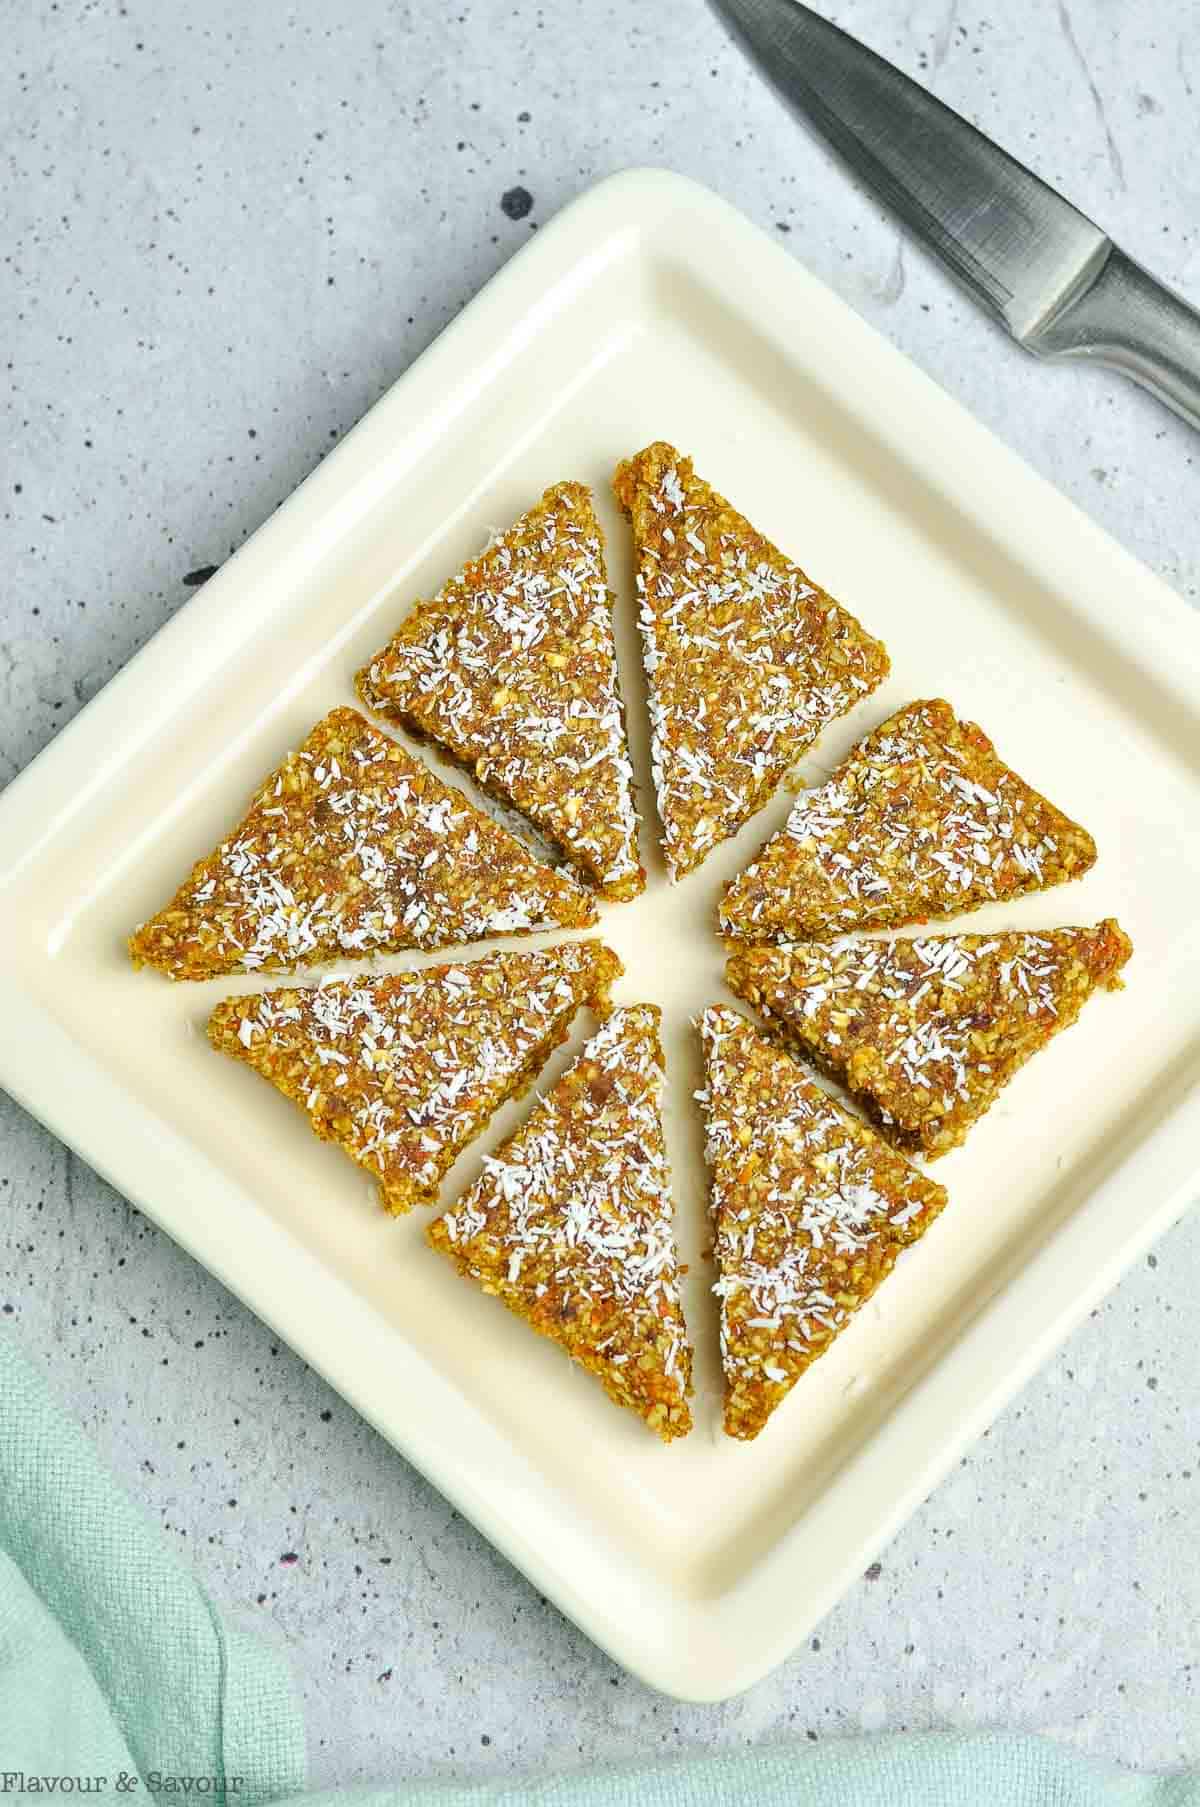 A square plate with carrot cake bites mixture sliced into triangles.